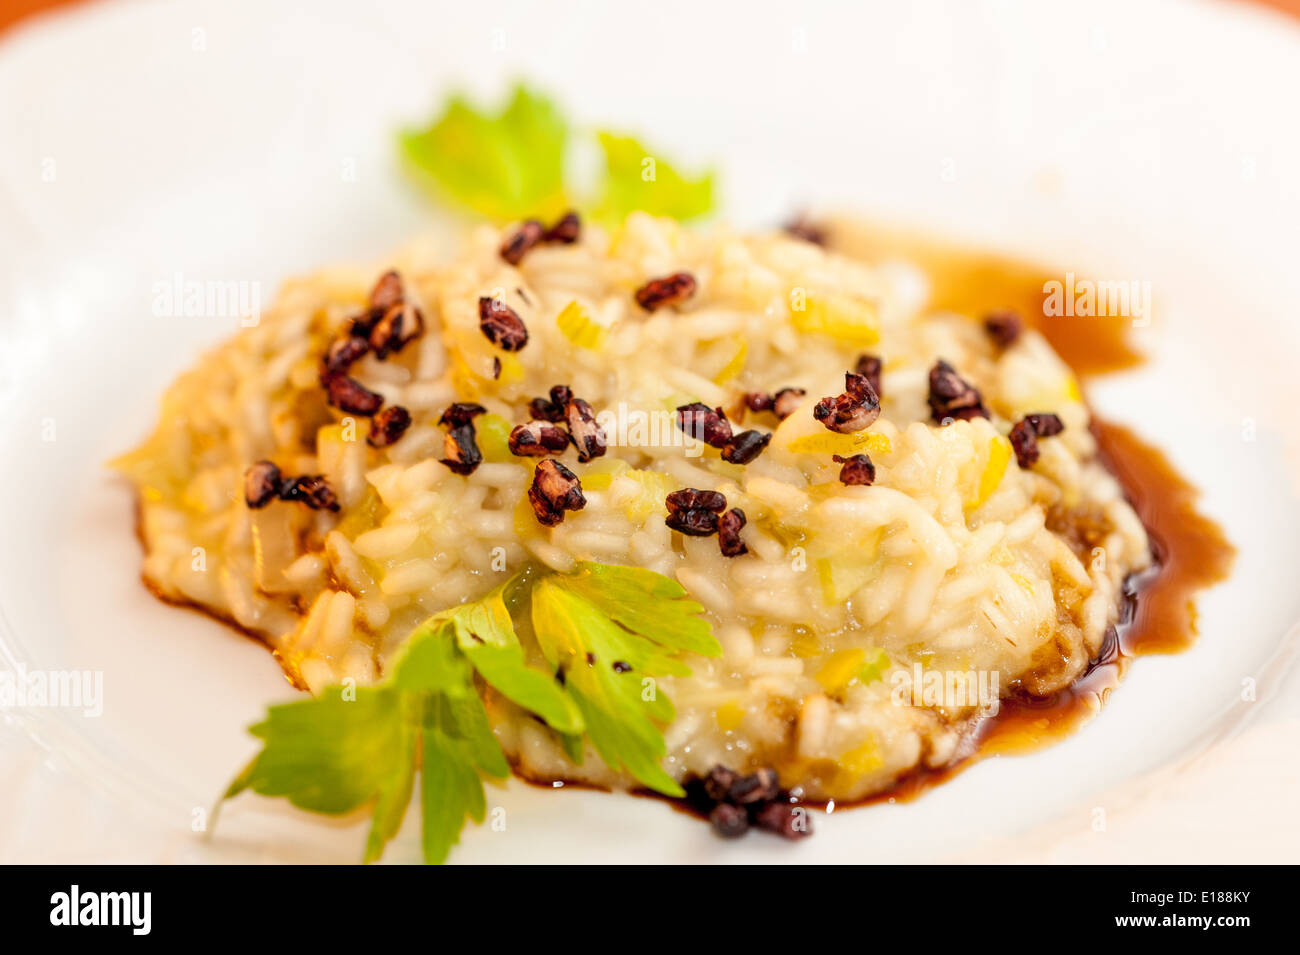 Plate of prepared food in Baltimore, Maryland, USA Stock Photo